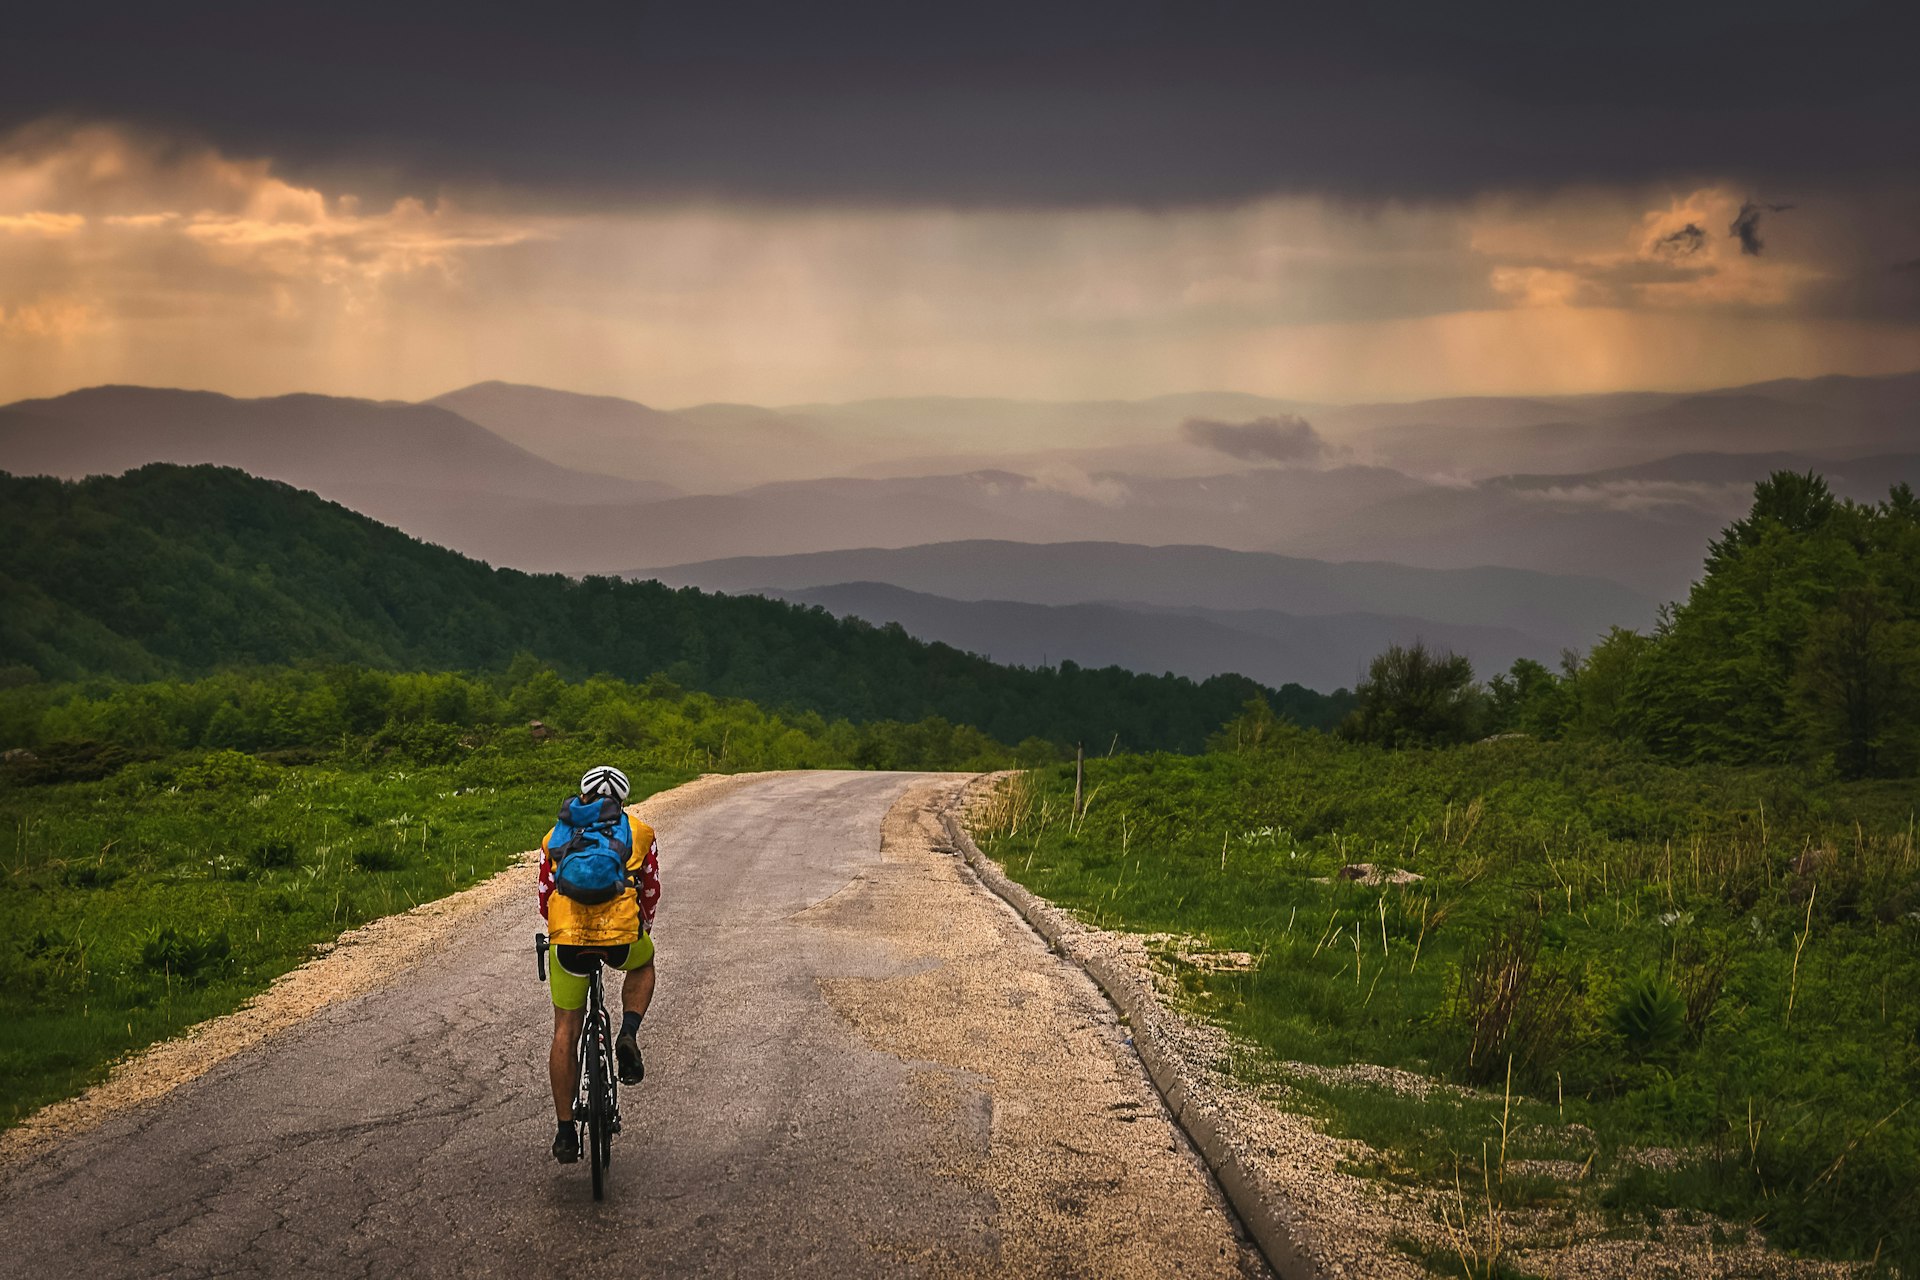 A solo cyclist heads down an empty road towards many hills at dusk